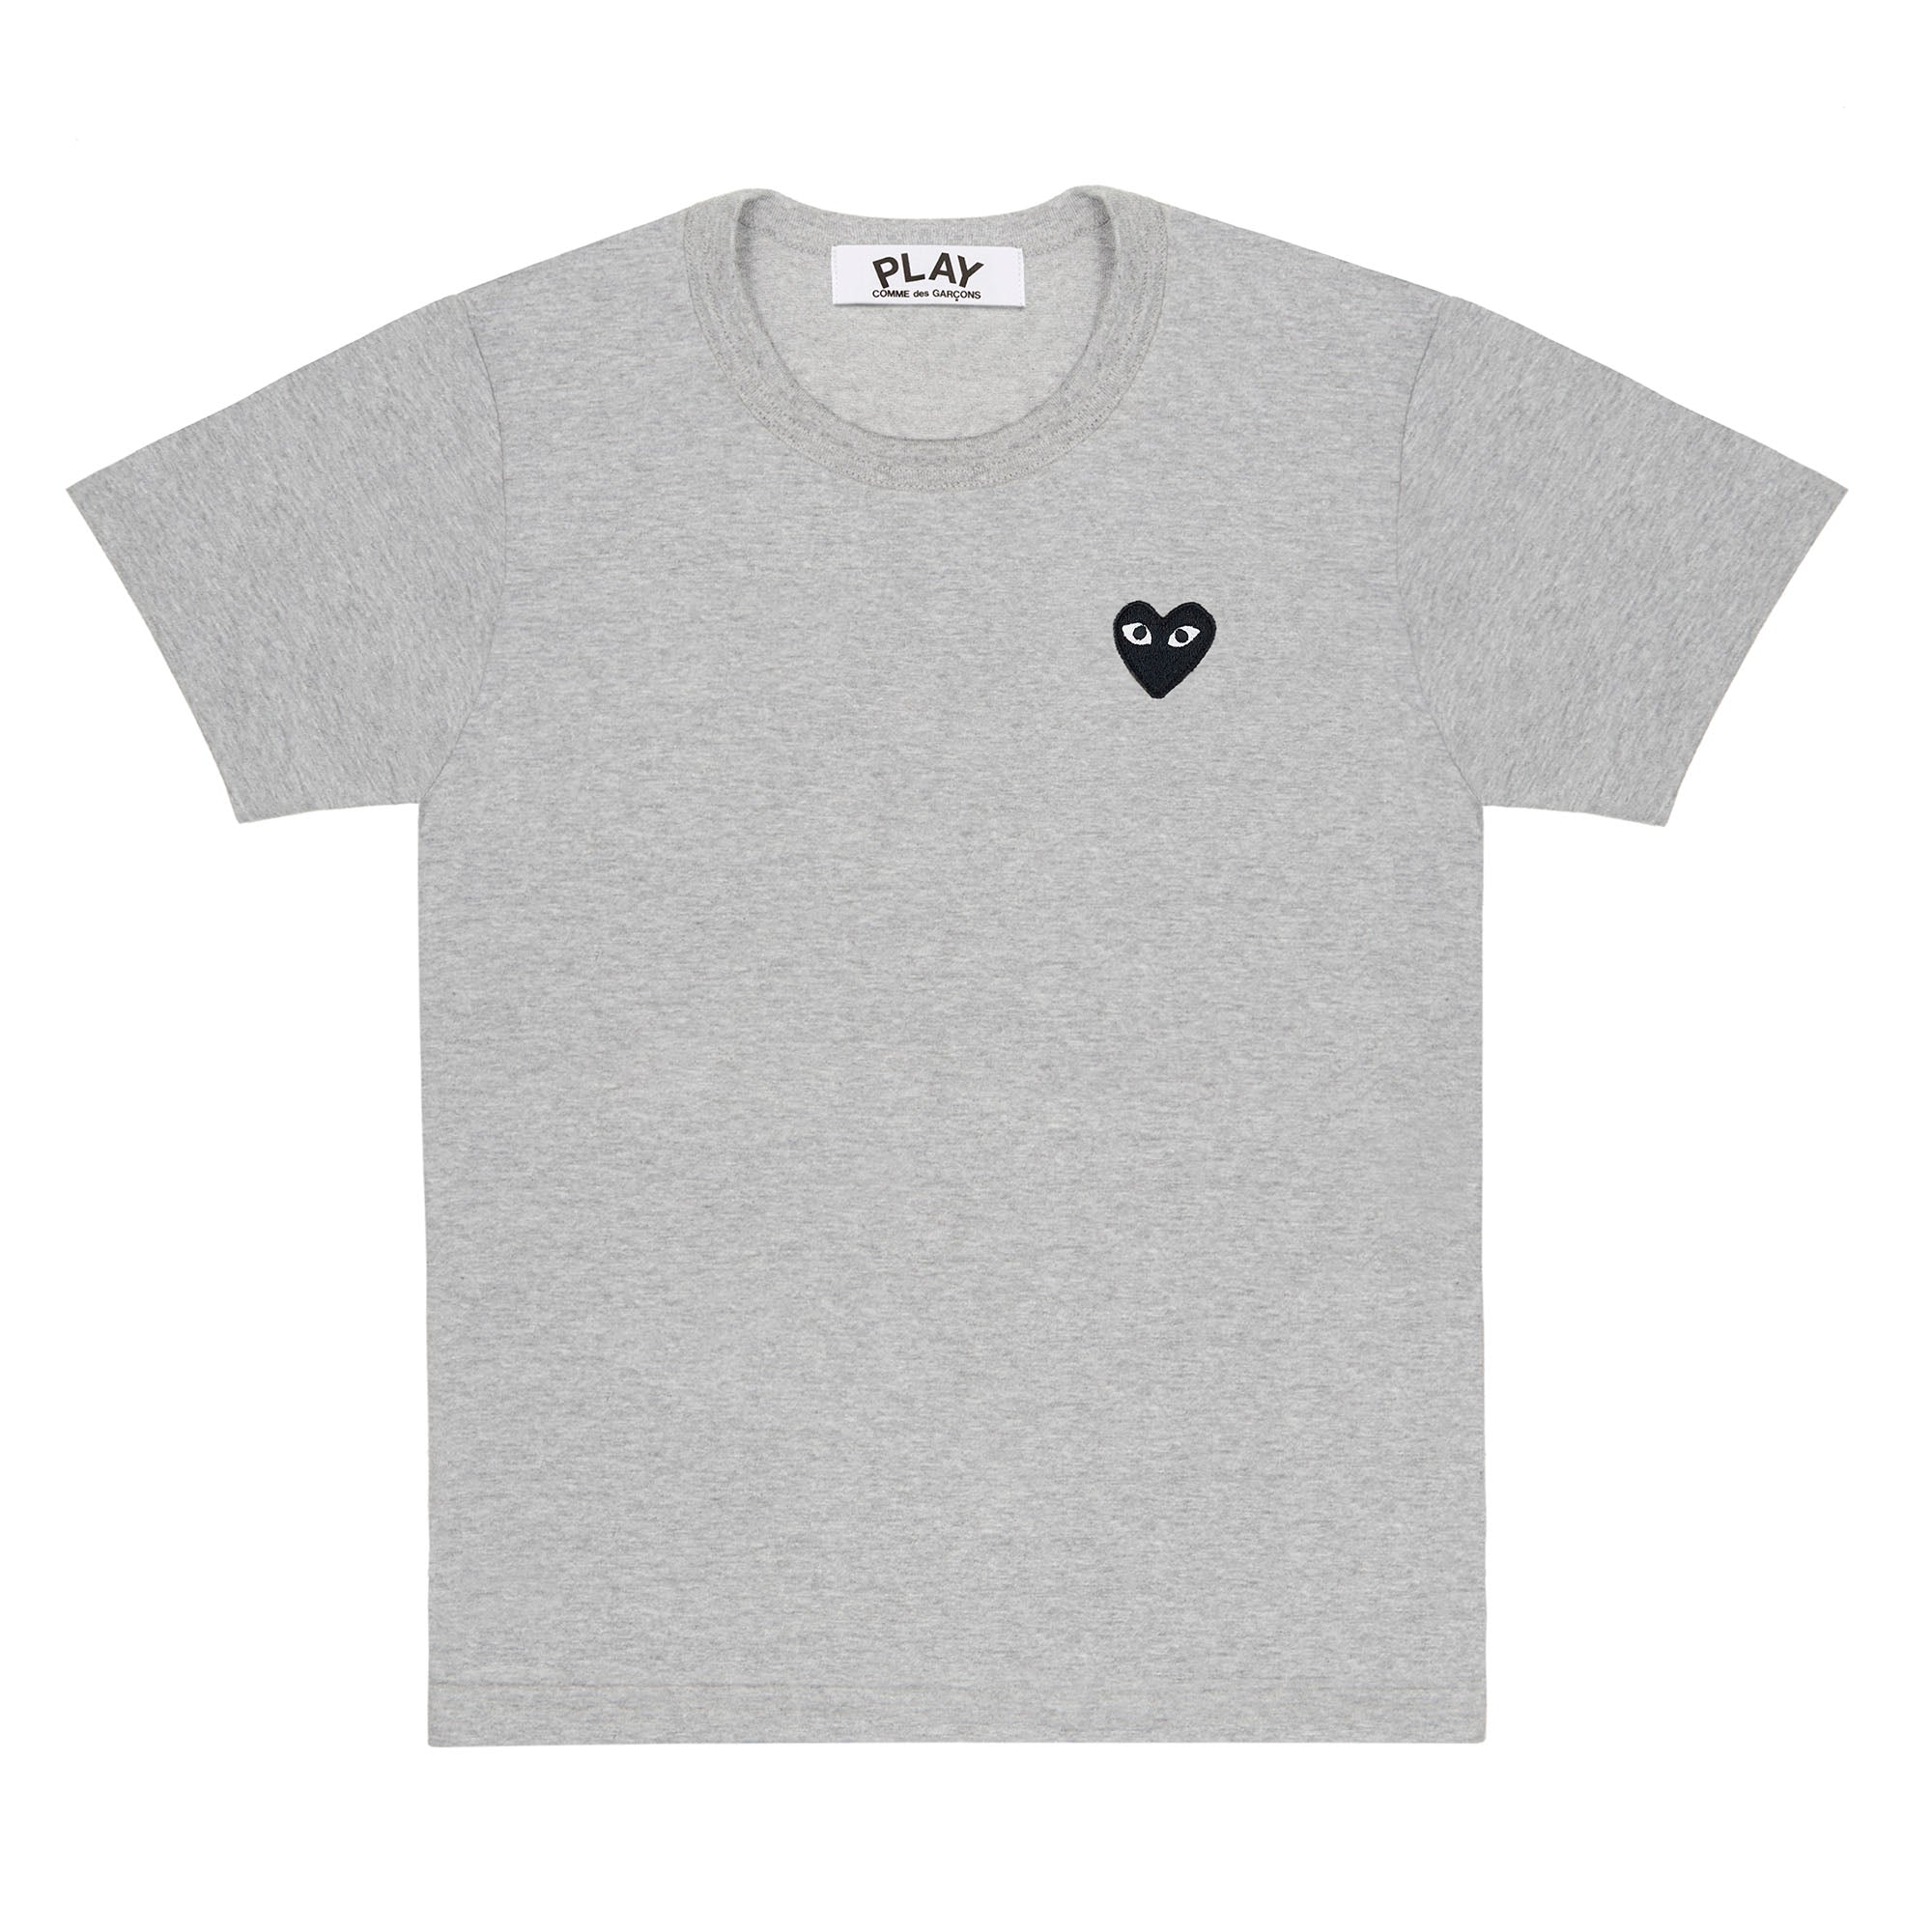 PLAY CDG - TOP DYED COTTON JERSEY WITH BLACK EMBLEM - (TOP DYED 